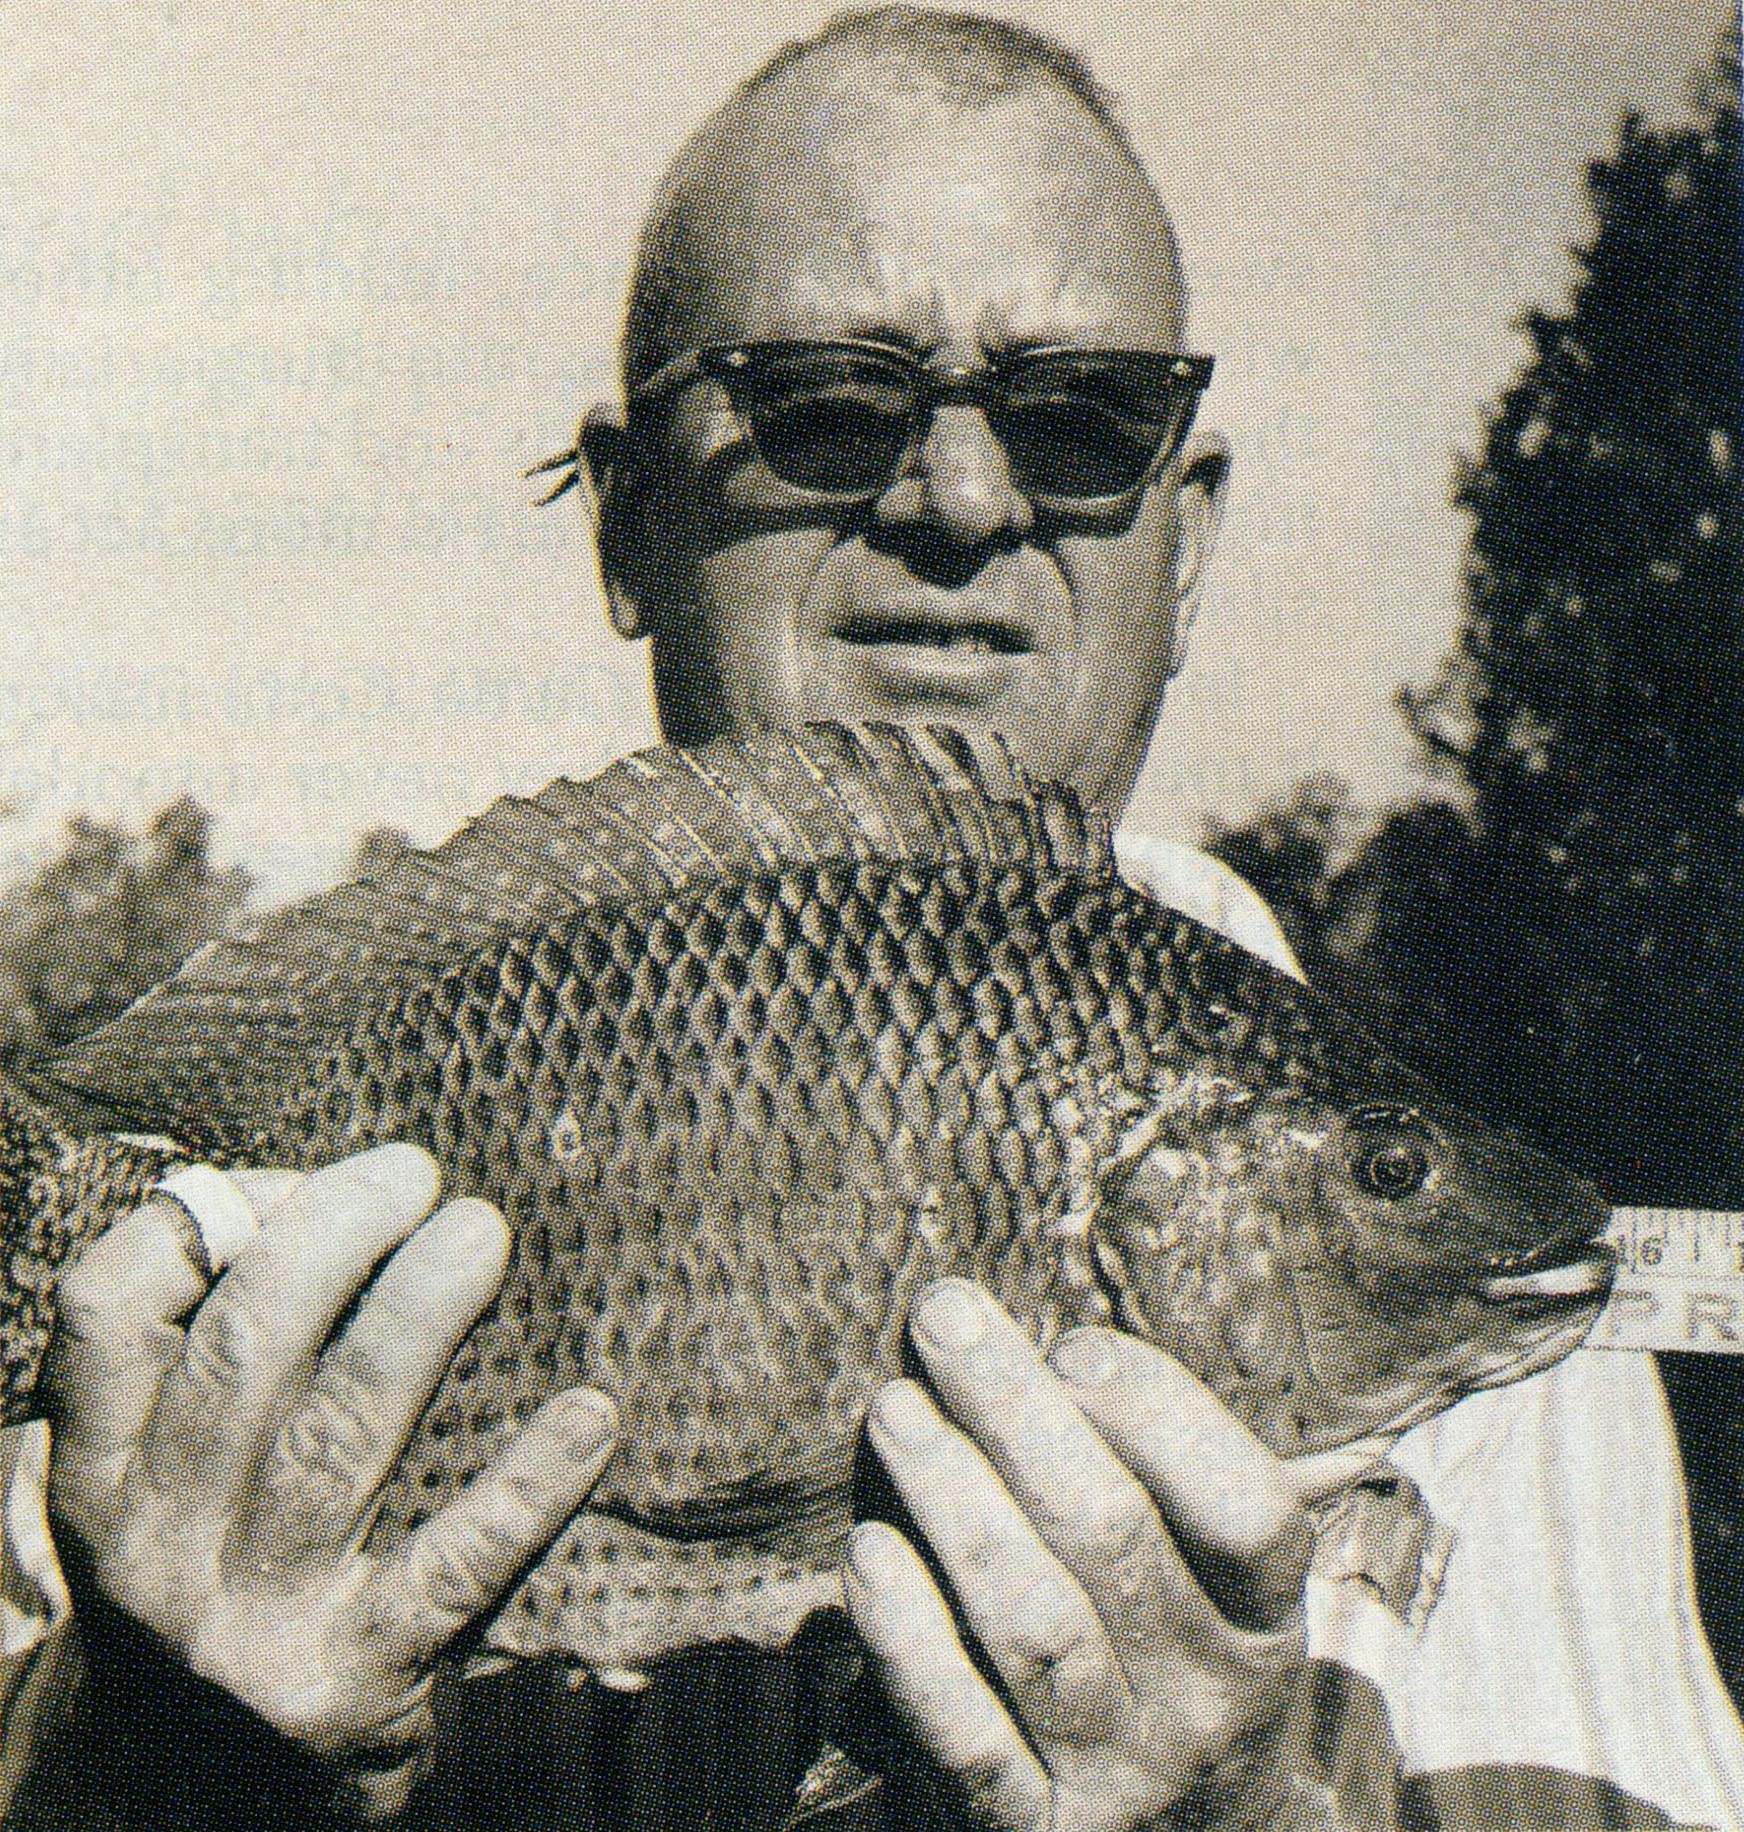 Vic Dunaway Remembered: Where Have You Gone, Nile Perch?